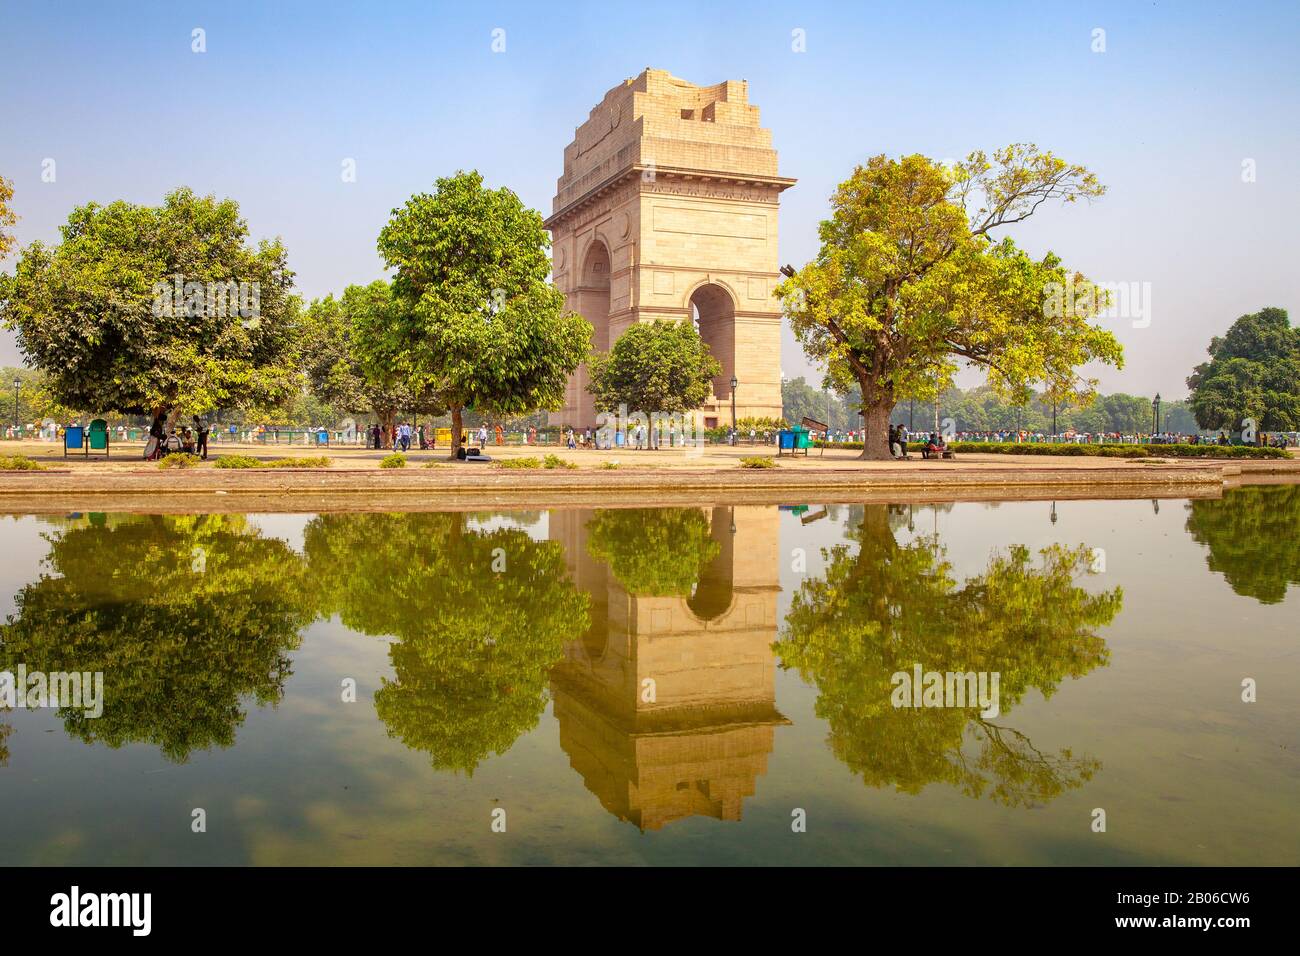 Canopy and India Gate in New Delhi, India Stock Photo